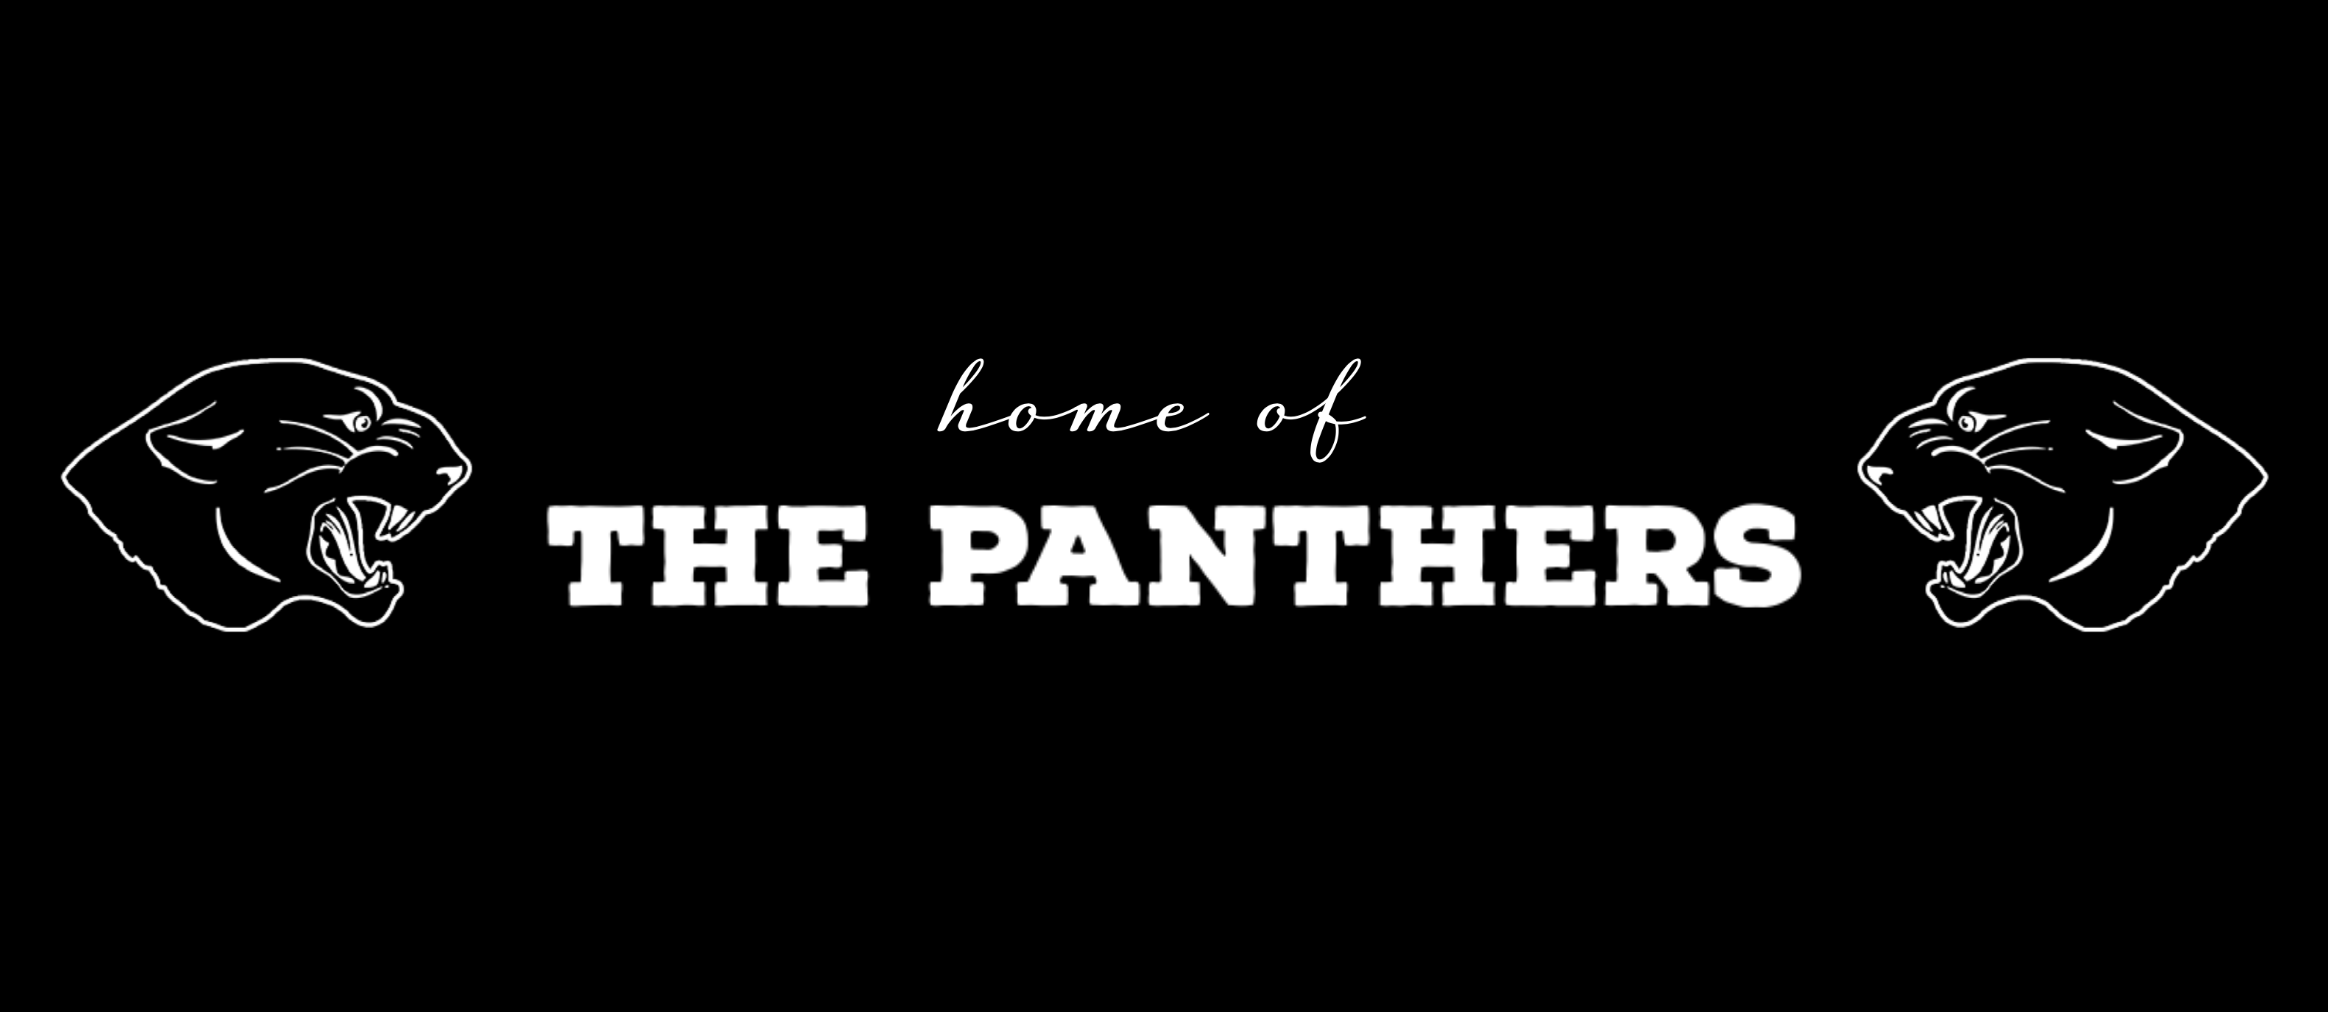 Home of the Panthers